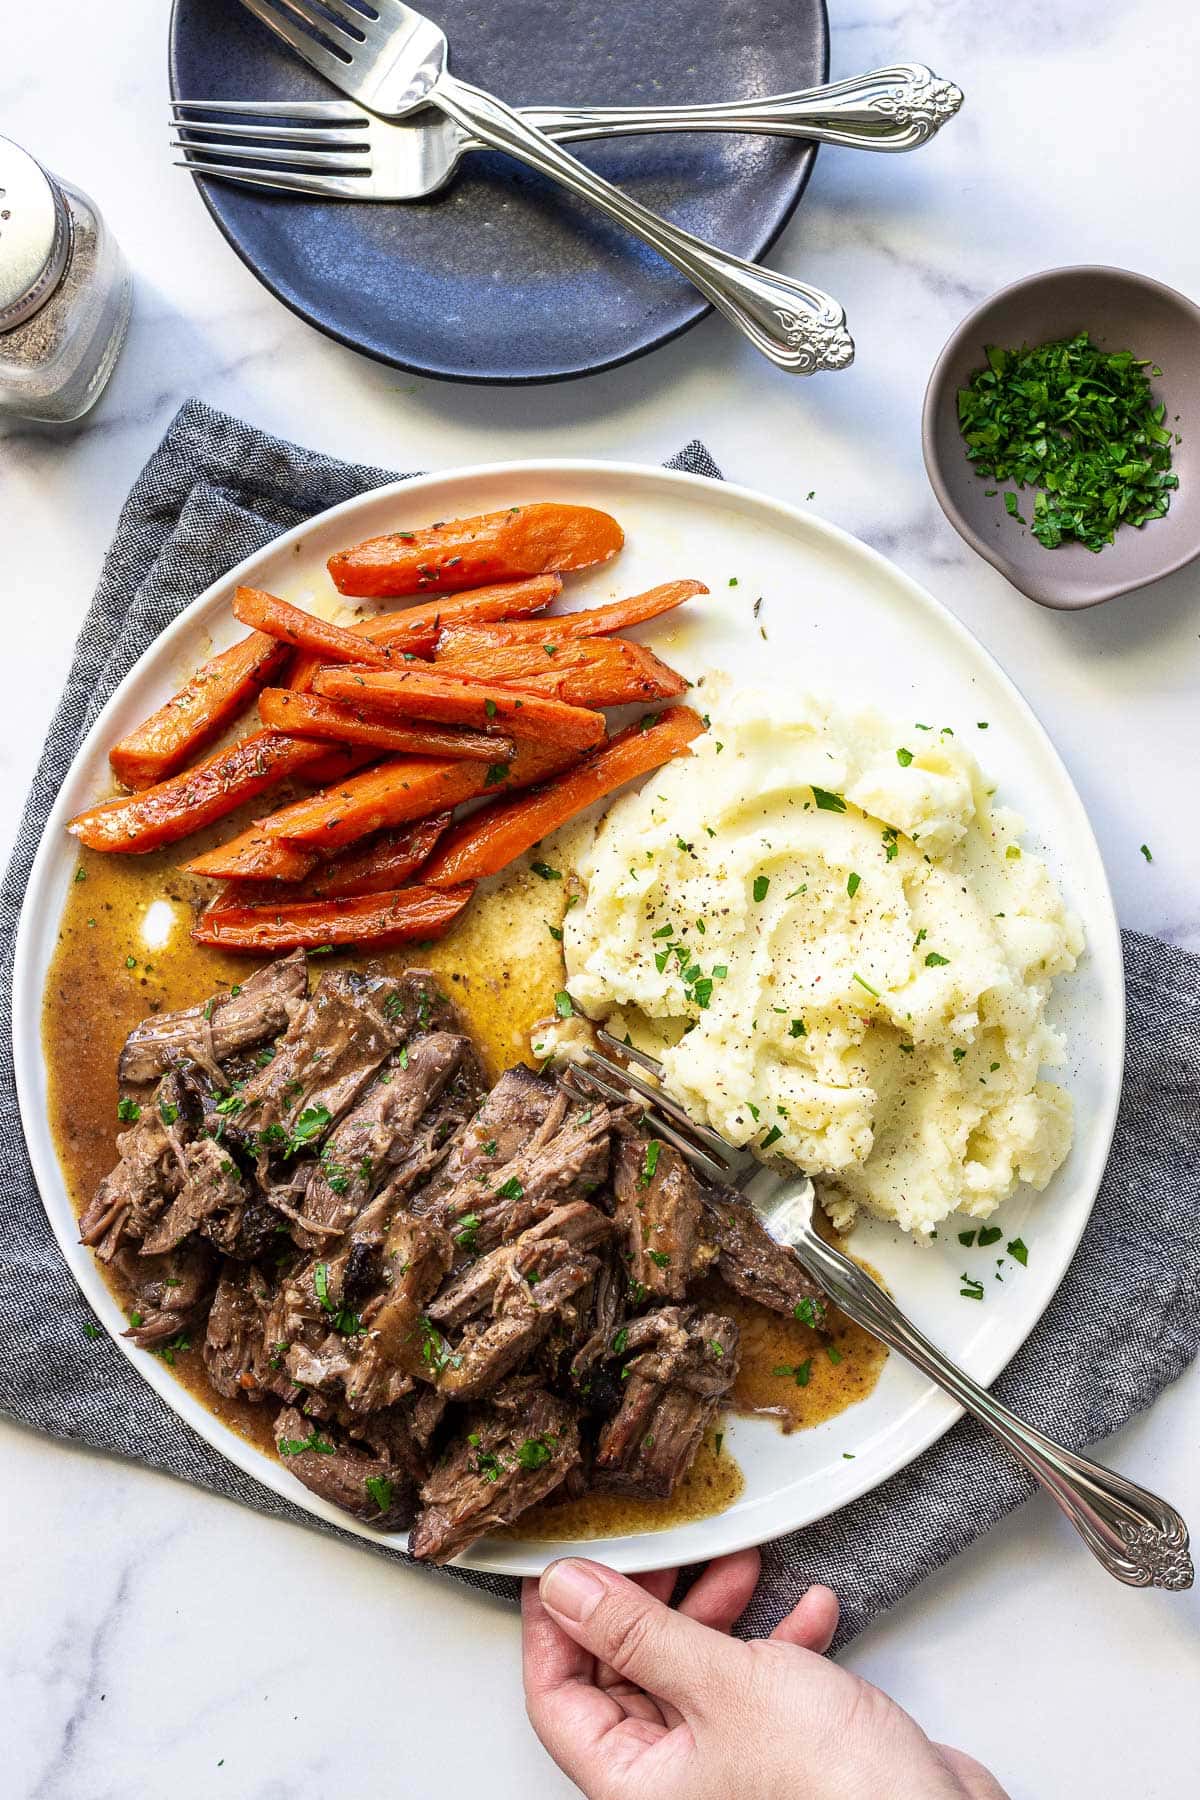 A plate of shredded chuck roast with mashed potatoes and carrots topped with fresh parsley.